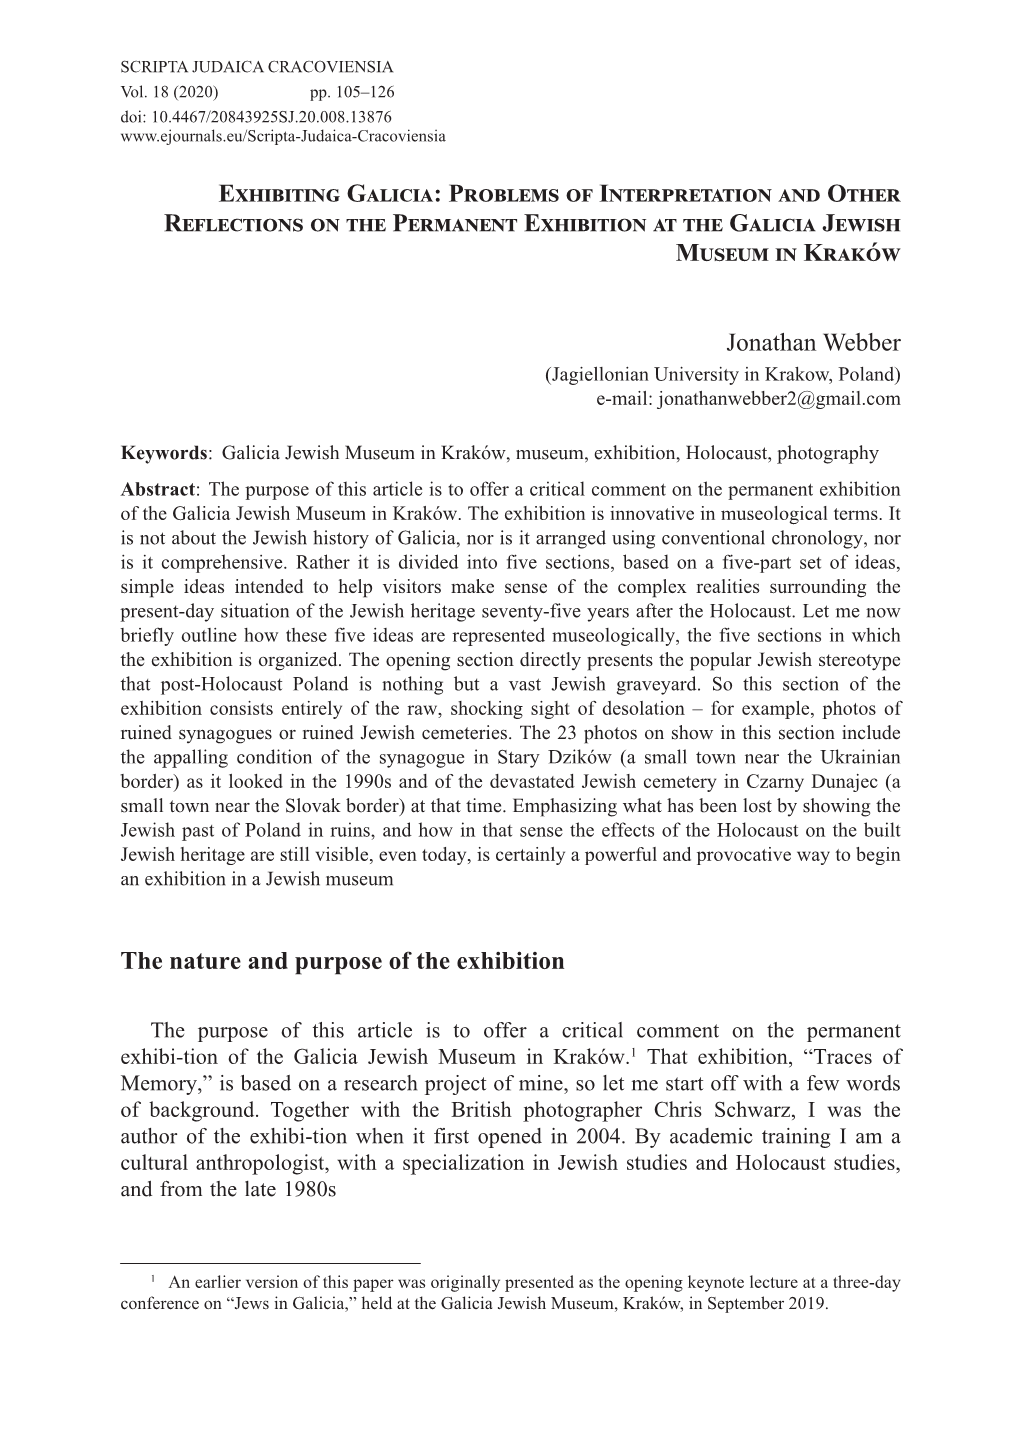 Exhibiting Galicia: Problems of Interpretation and Other Reflections on the Permanent Exhibition at the Galicia Jewish Museum in Kraków